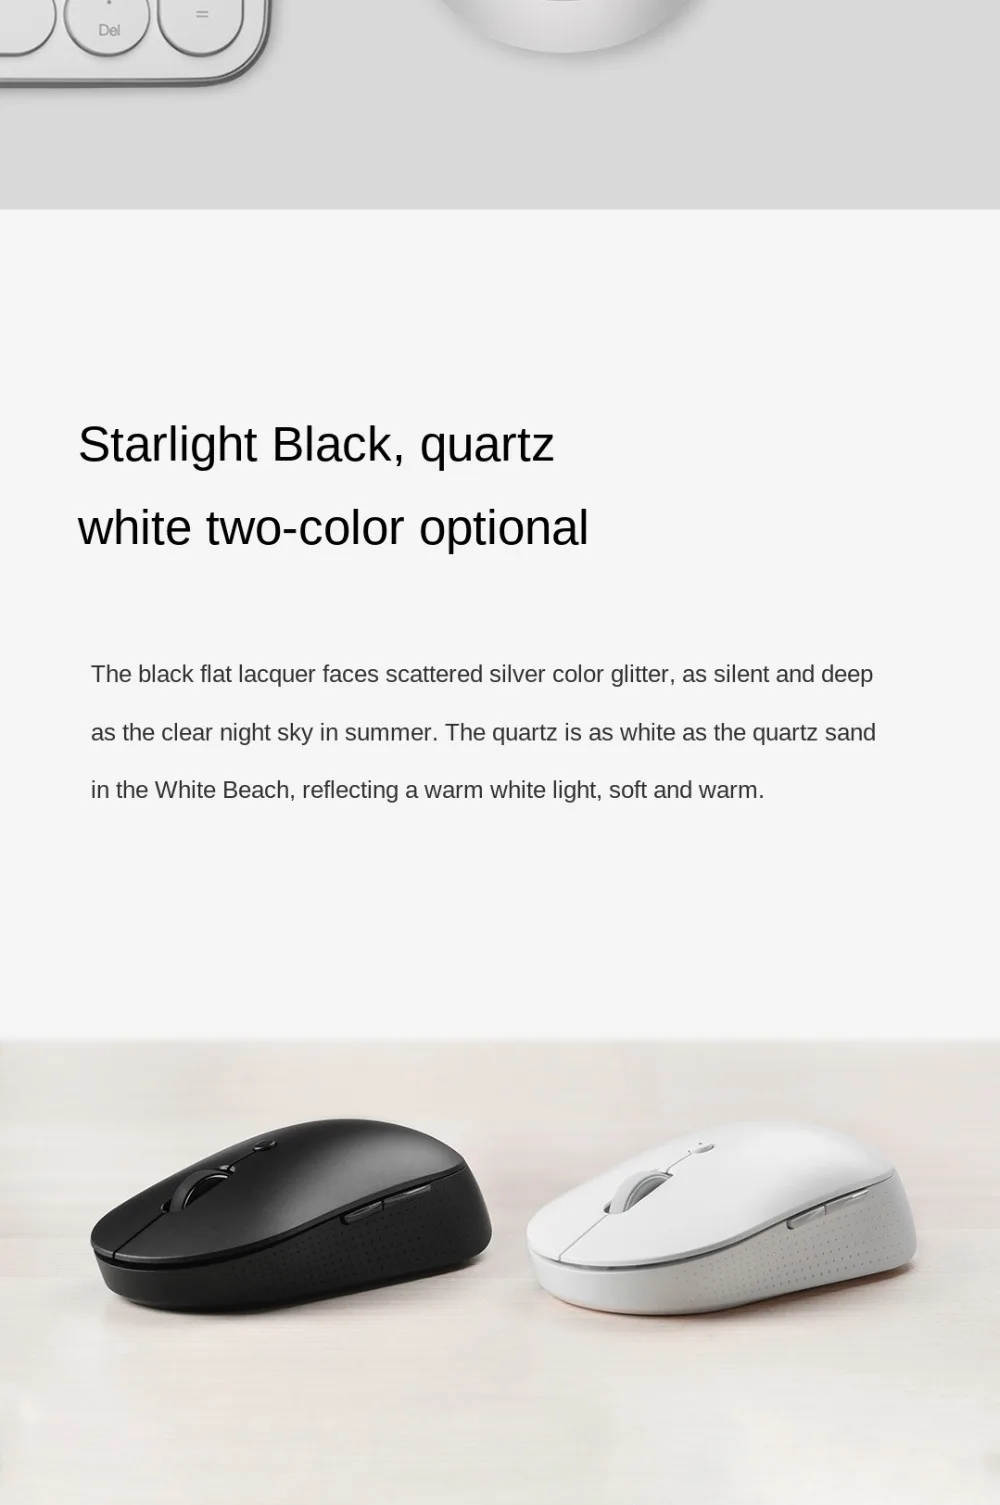 pc mouse Original Xiaomi Mijia Dual-Mode Wireless Mouse Silent Edition 2.4GHz and Bluetooth USB Connection Side button Mini Game Mouse gaming mouse for large hands